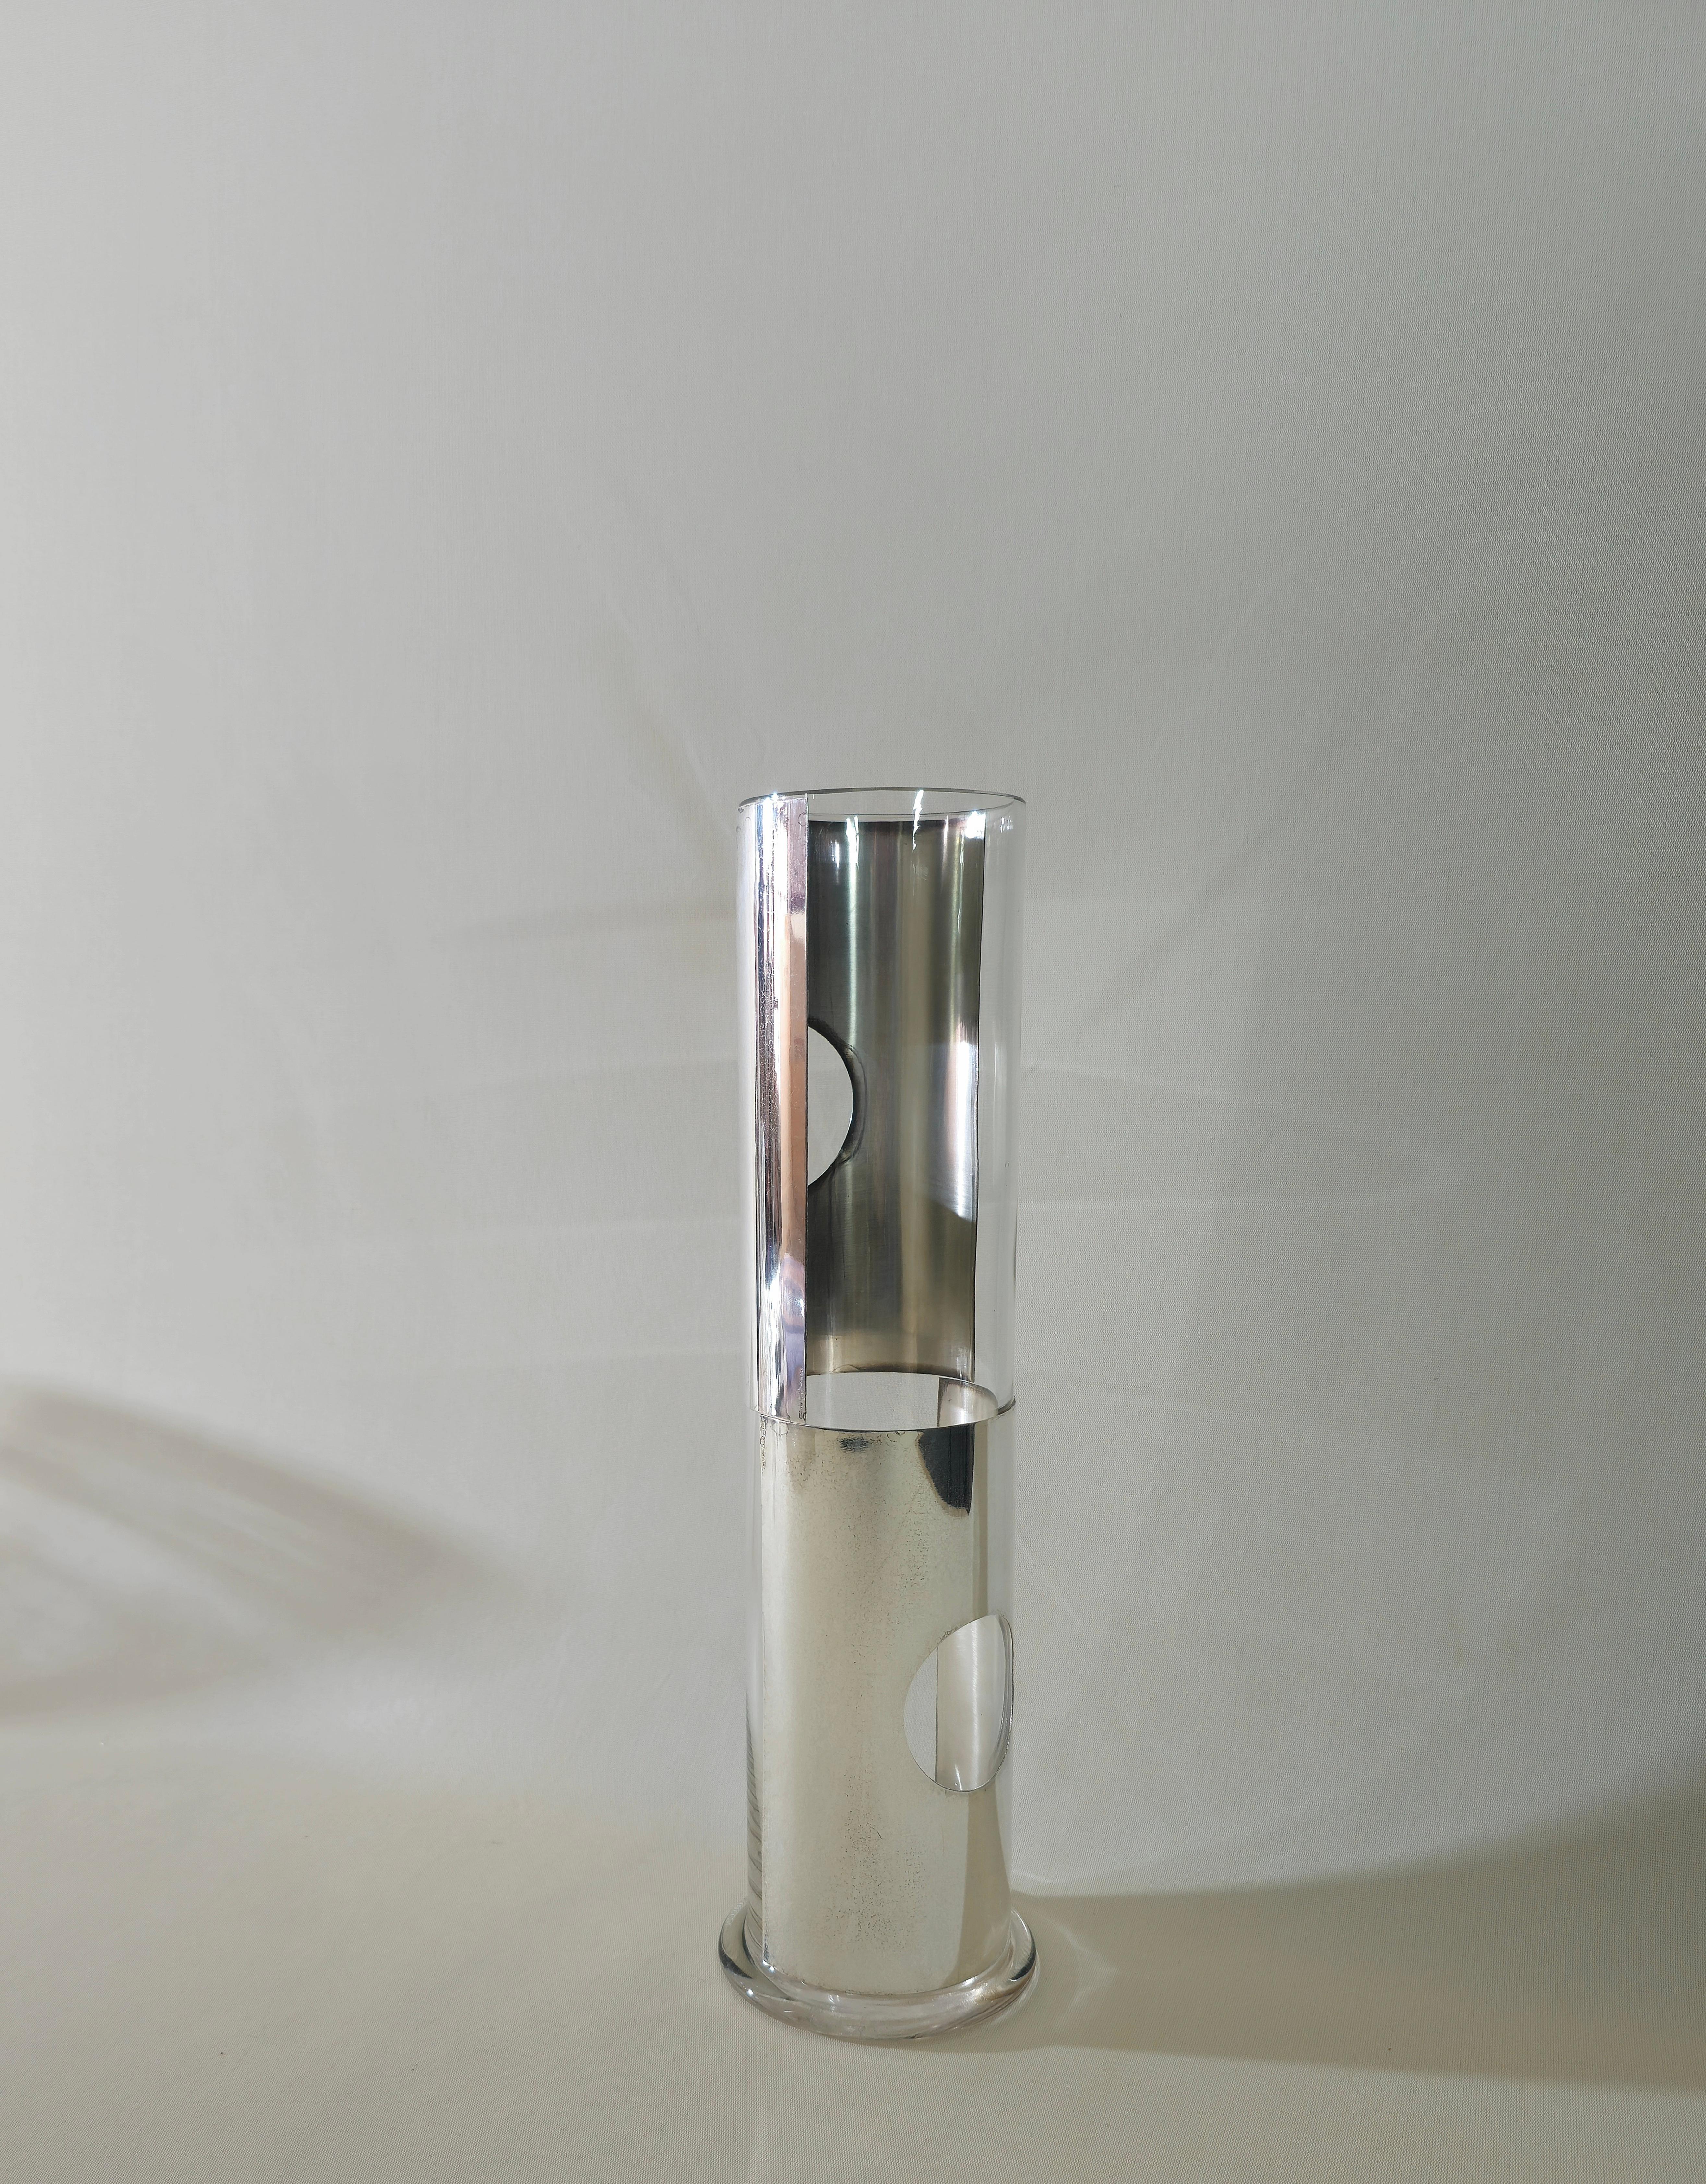 Glass and silver metal vase by Lino Sabattini, 1970s Design Italy Midcentury For Sale 3